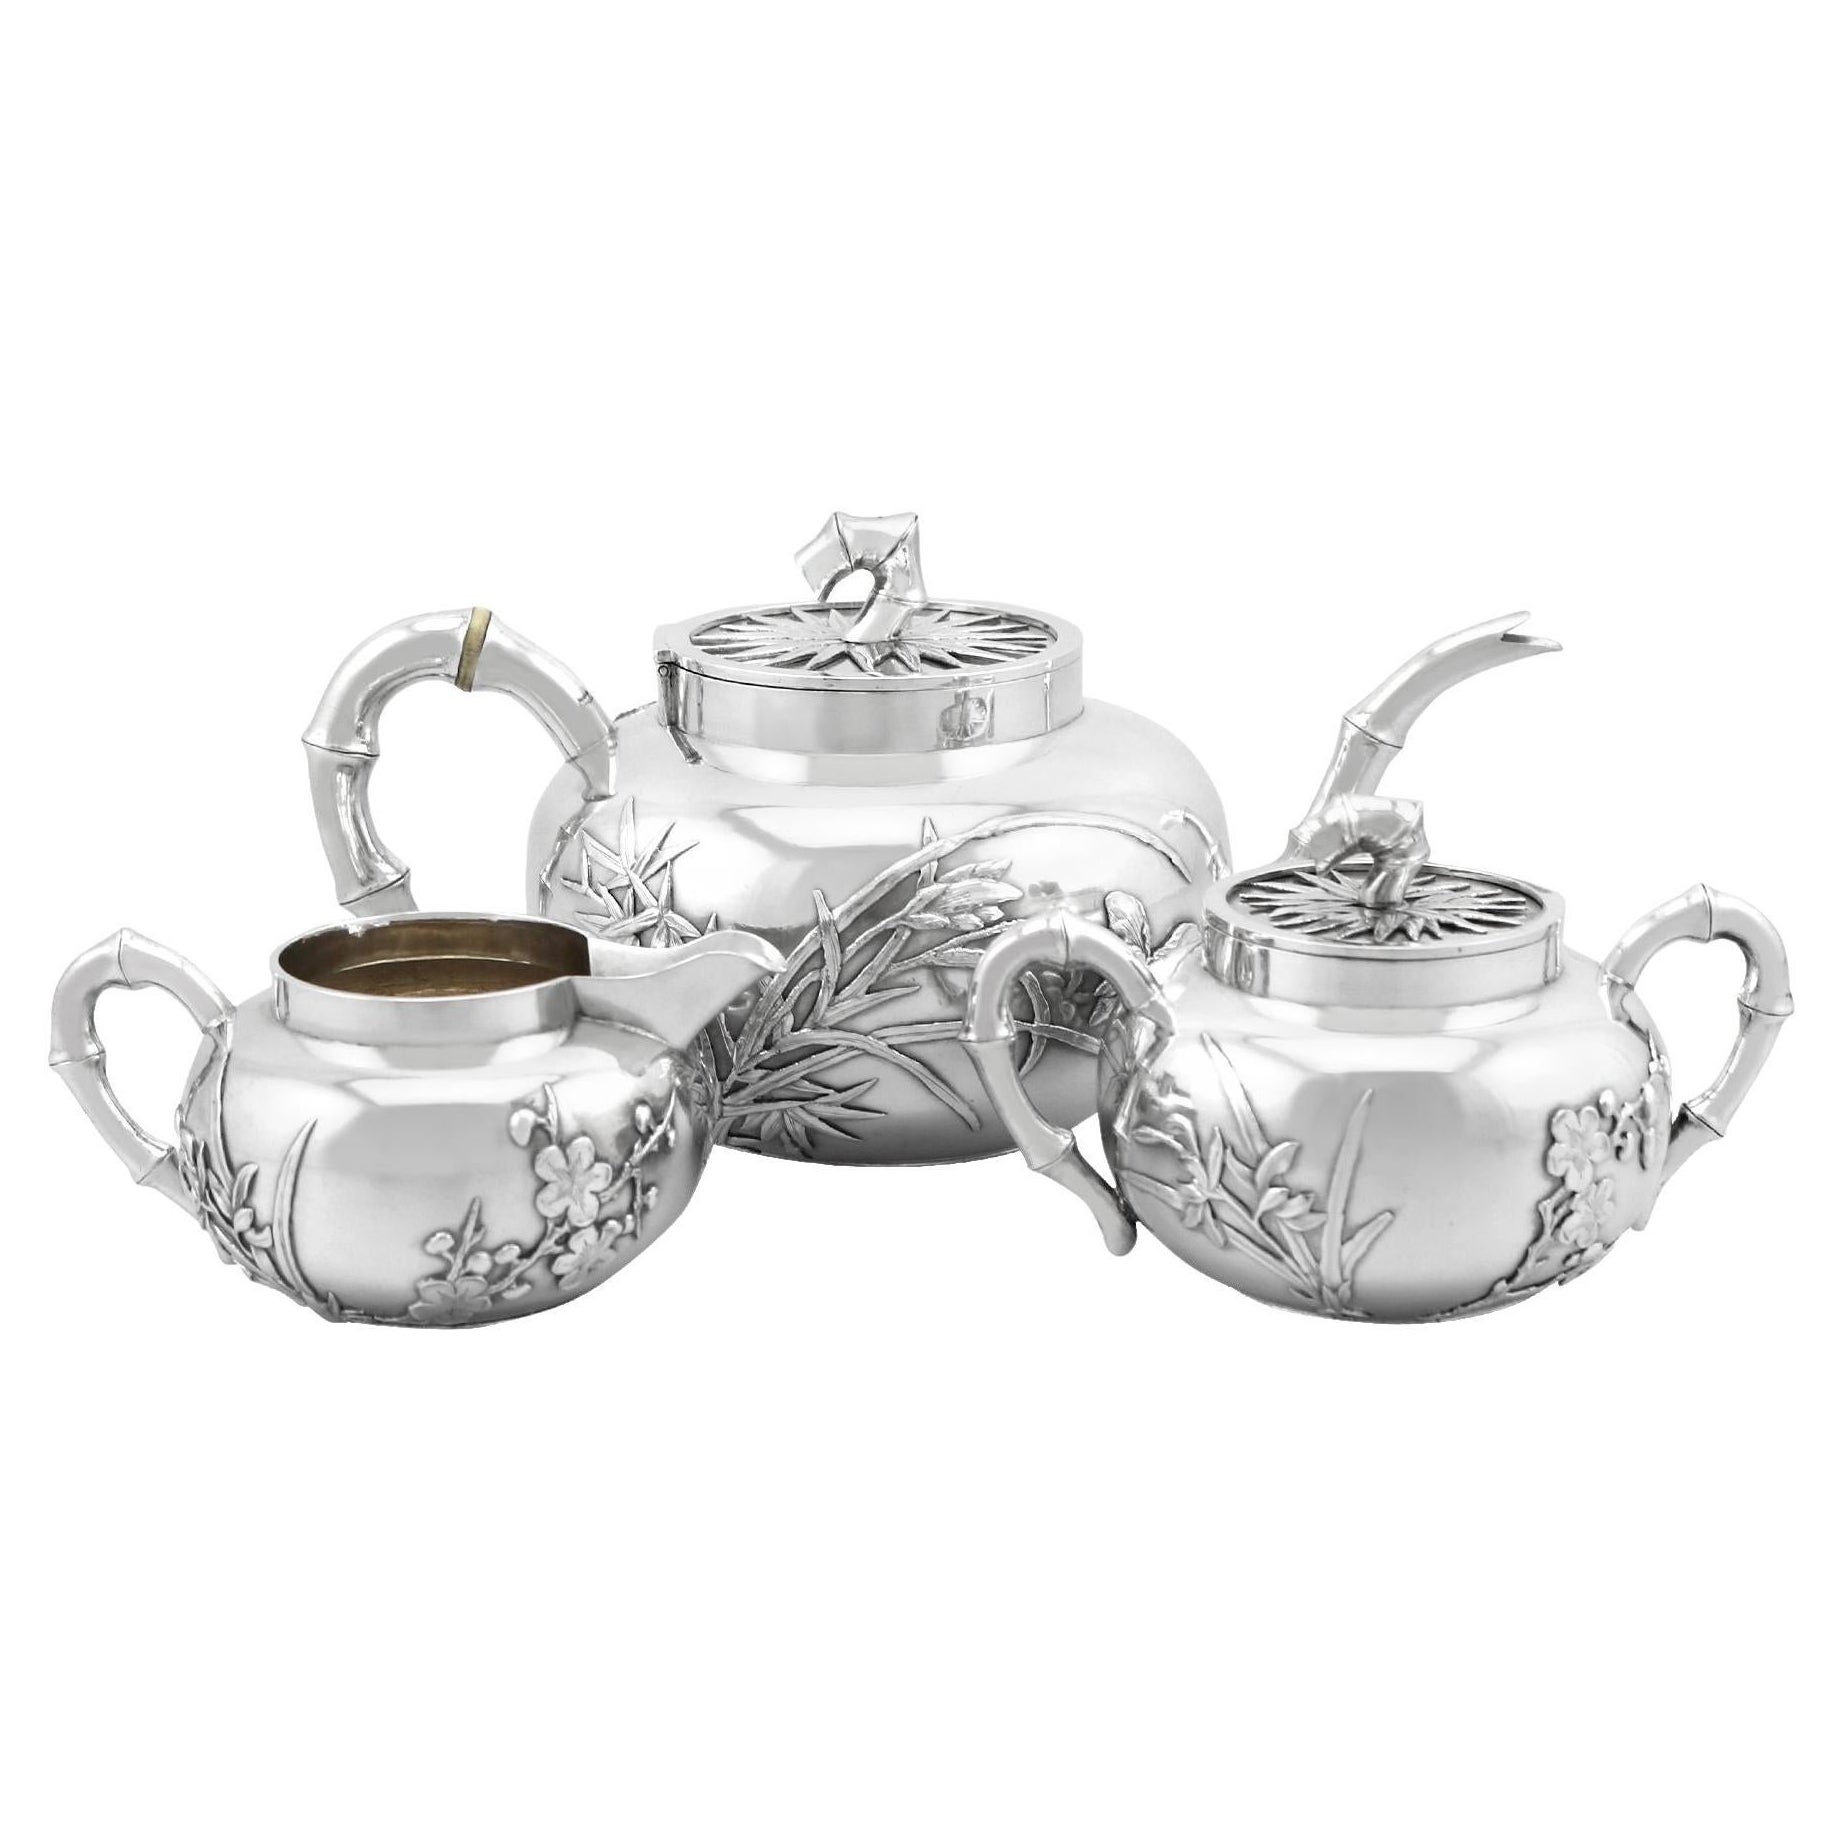 1800s, Antique Chinese Export Silver Three Piece Tea Service